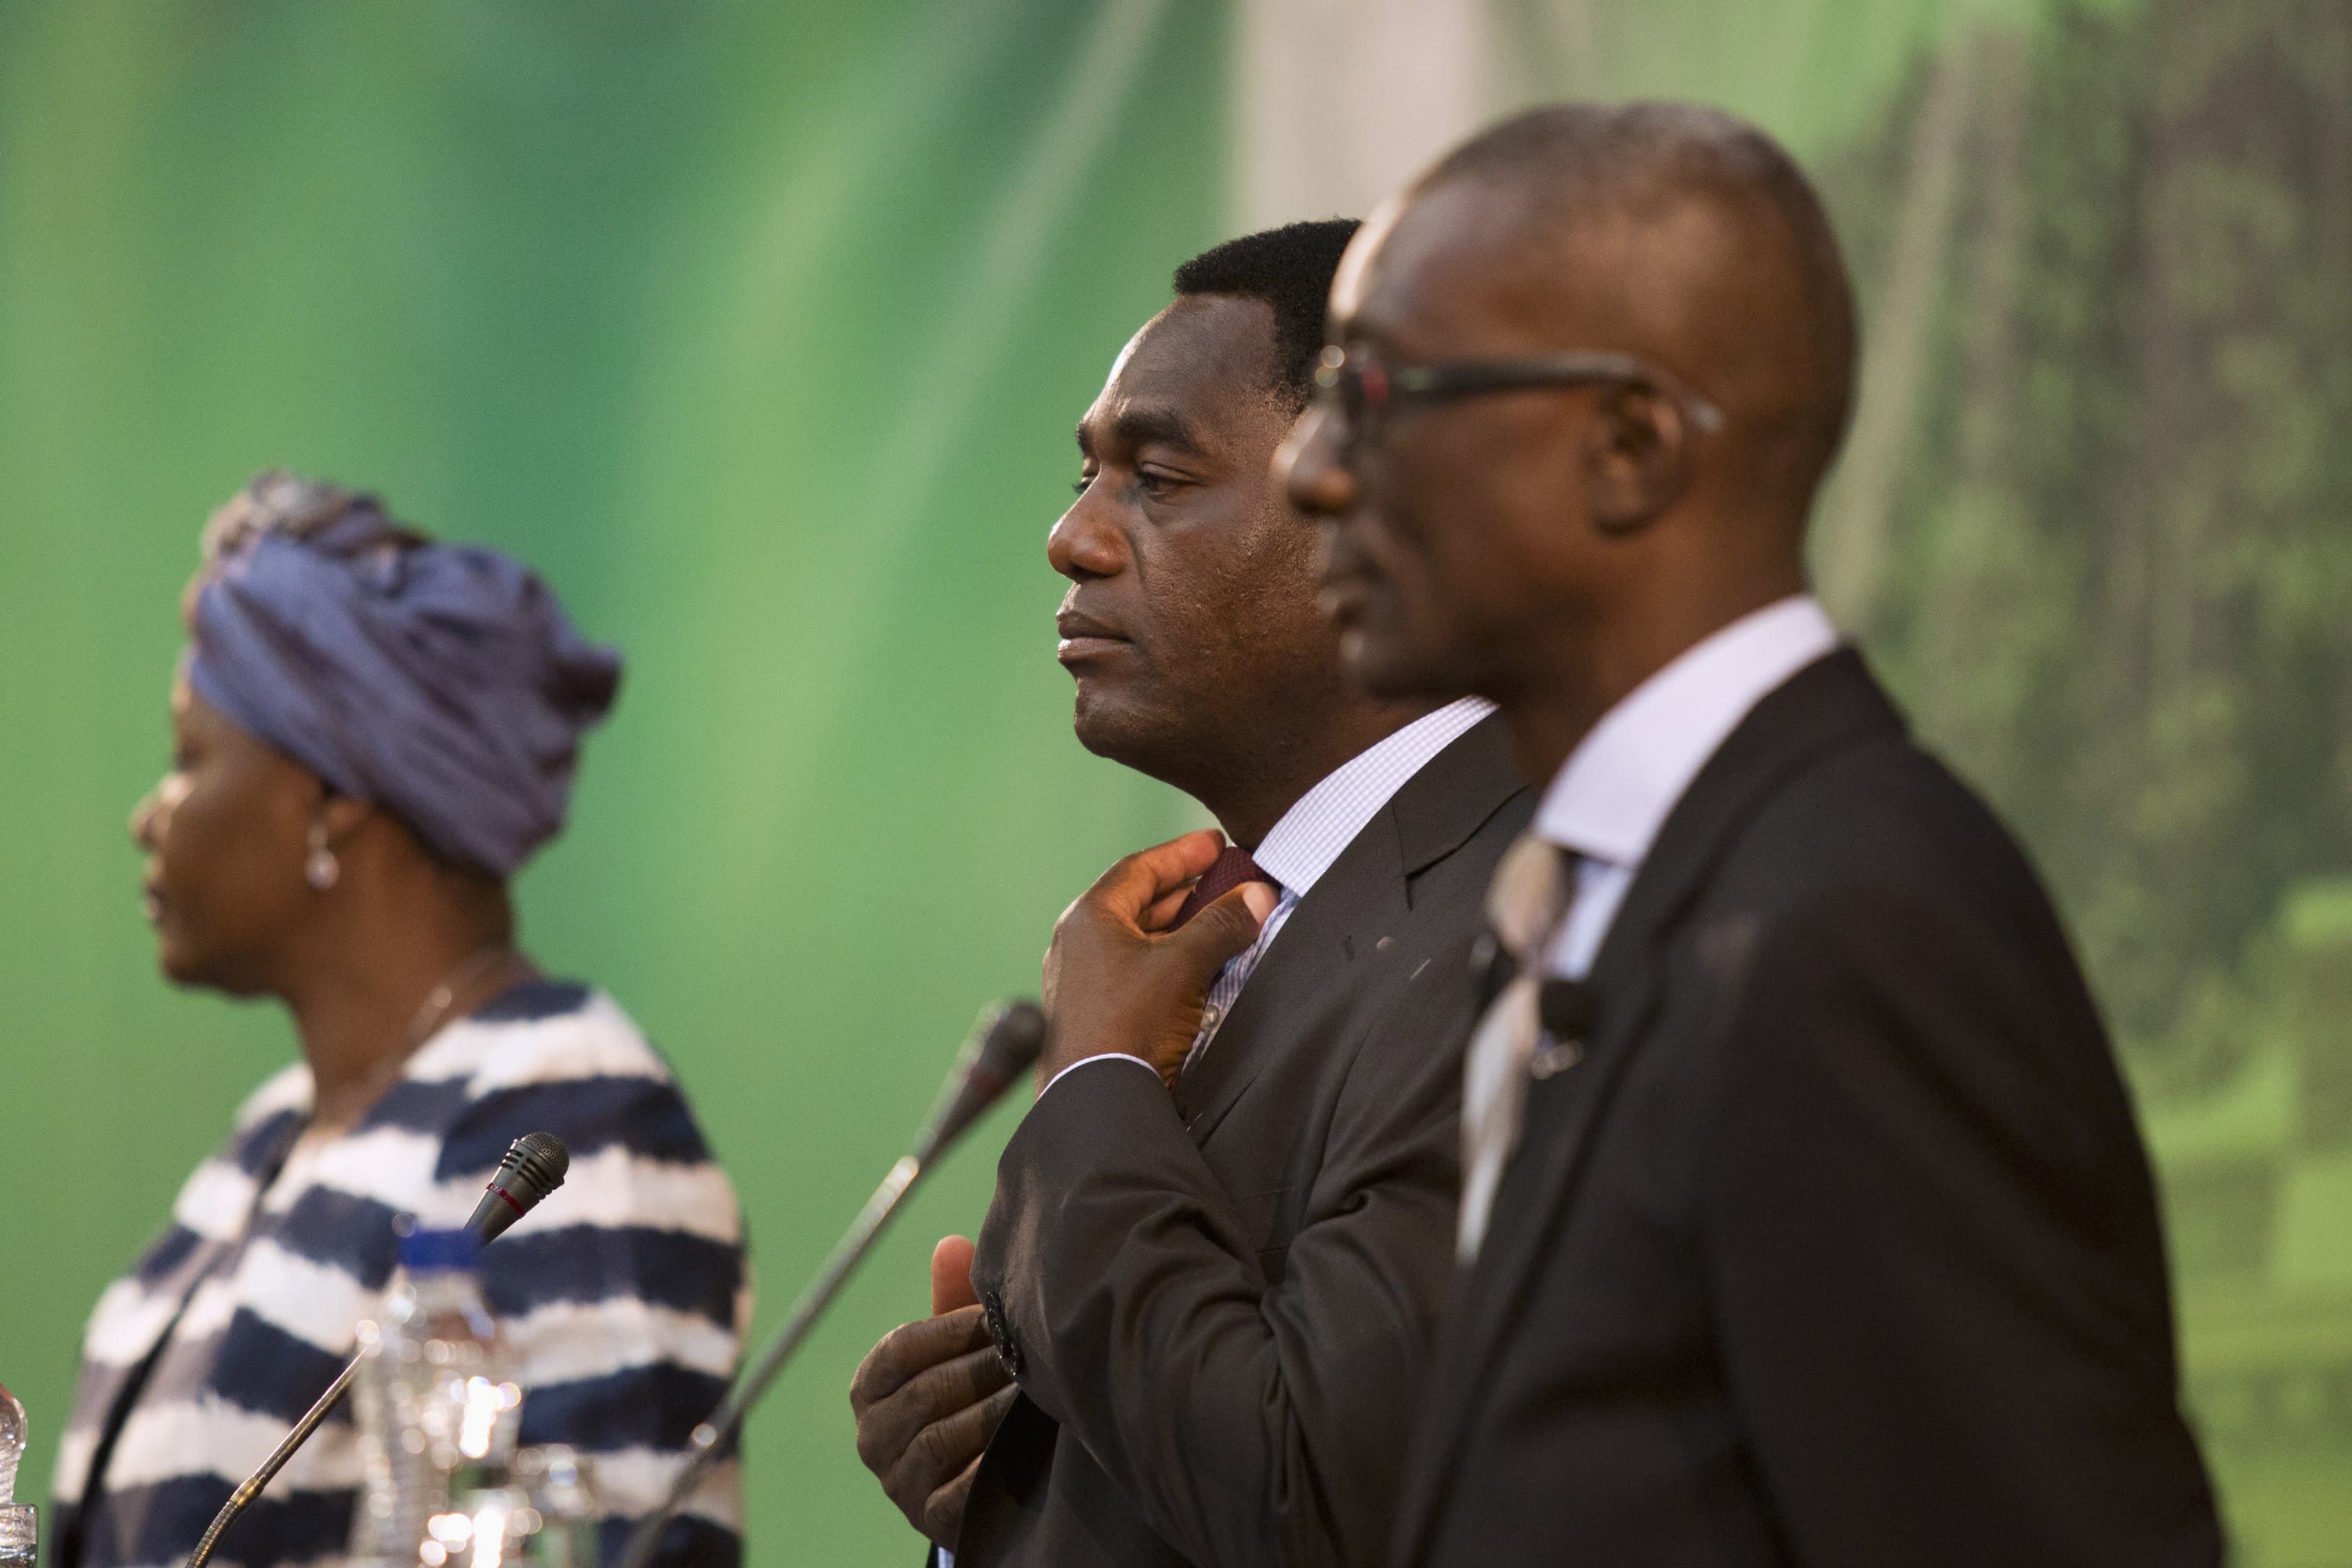 Presidential candidate for the UPND Hakainde Hichilema (C) straightens his tie during a live television debate in Lusaka, 15 January 2015, REUTERS/Rogan Ward